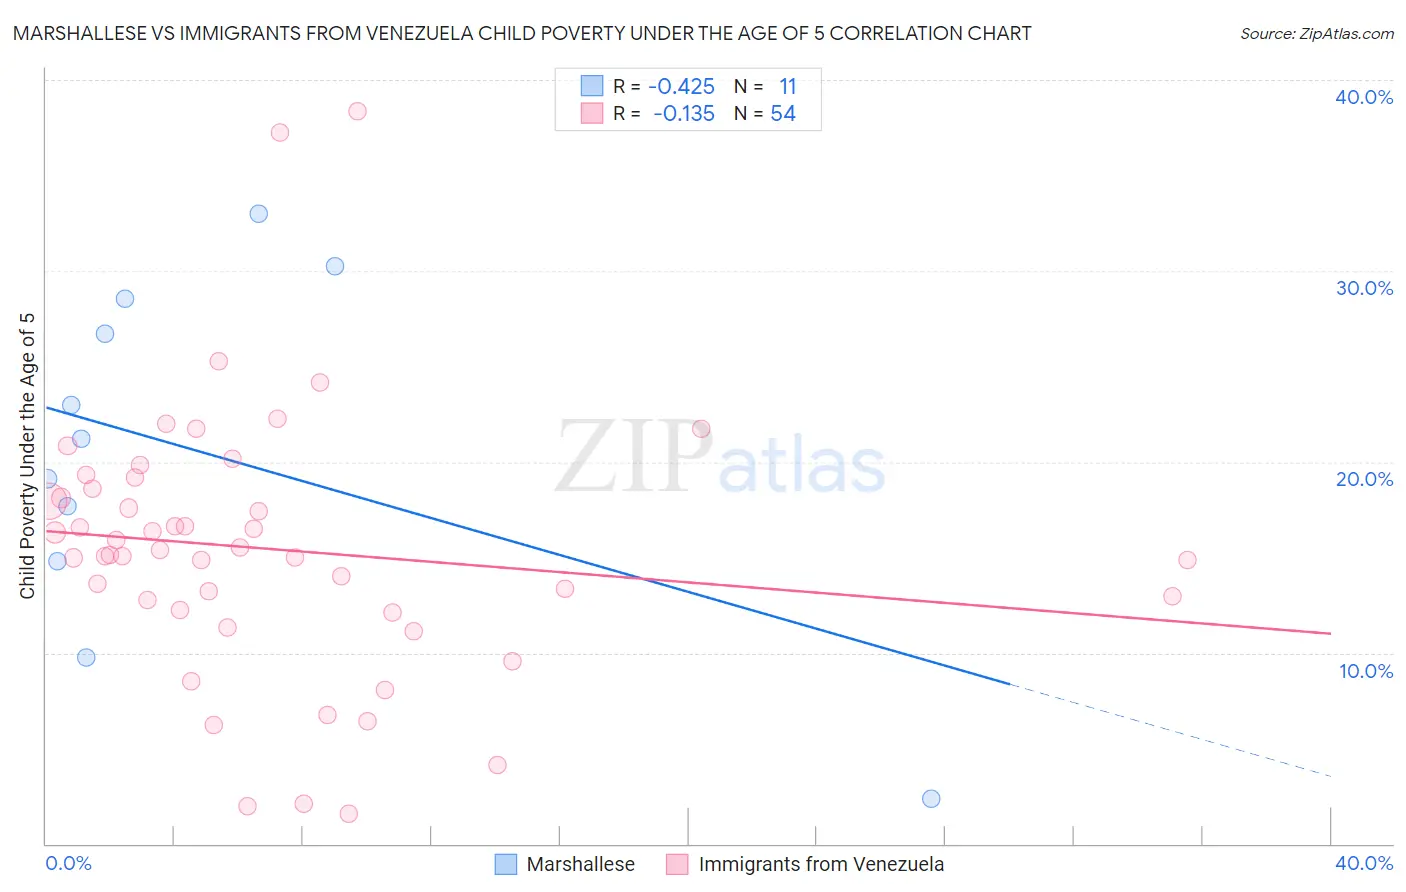 Marshallese vs Immigrants from Venezuela Child Poverty Under the Age of 5